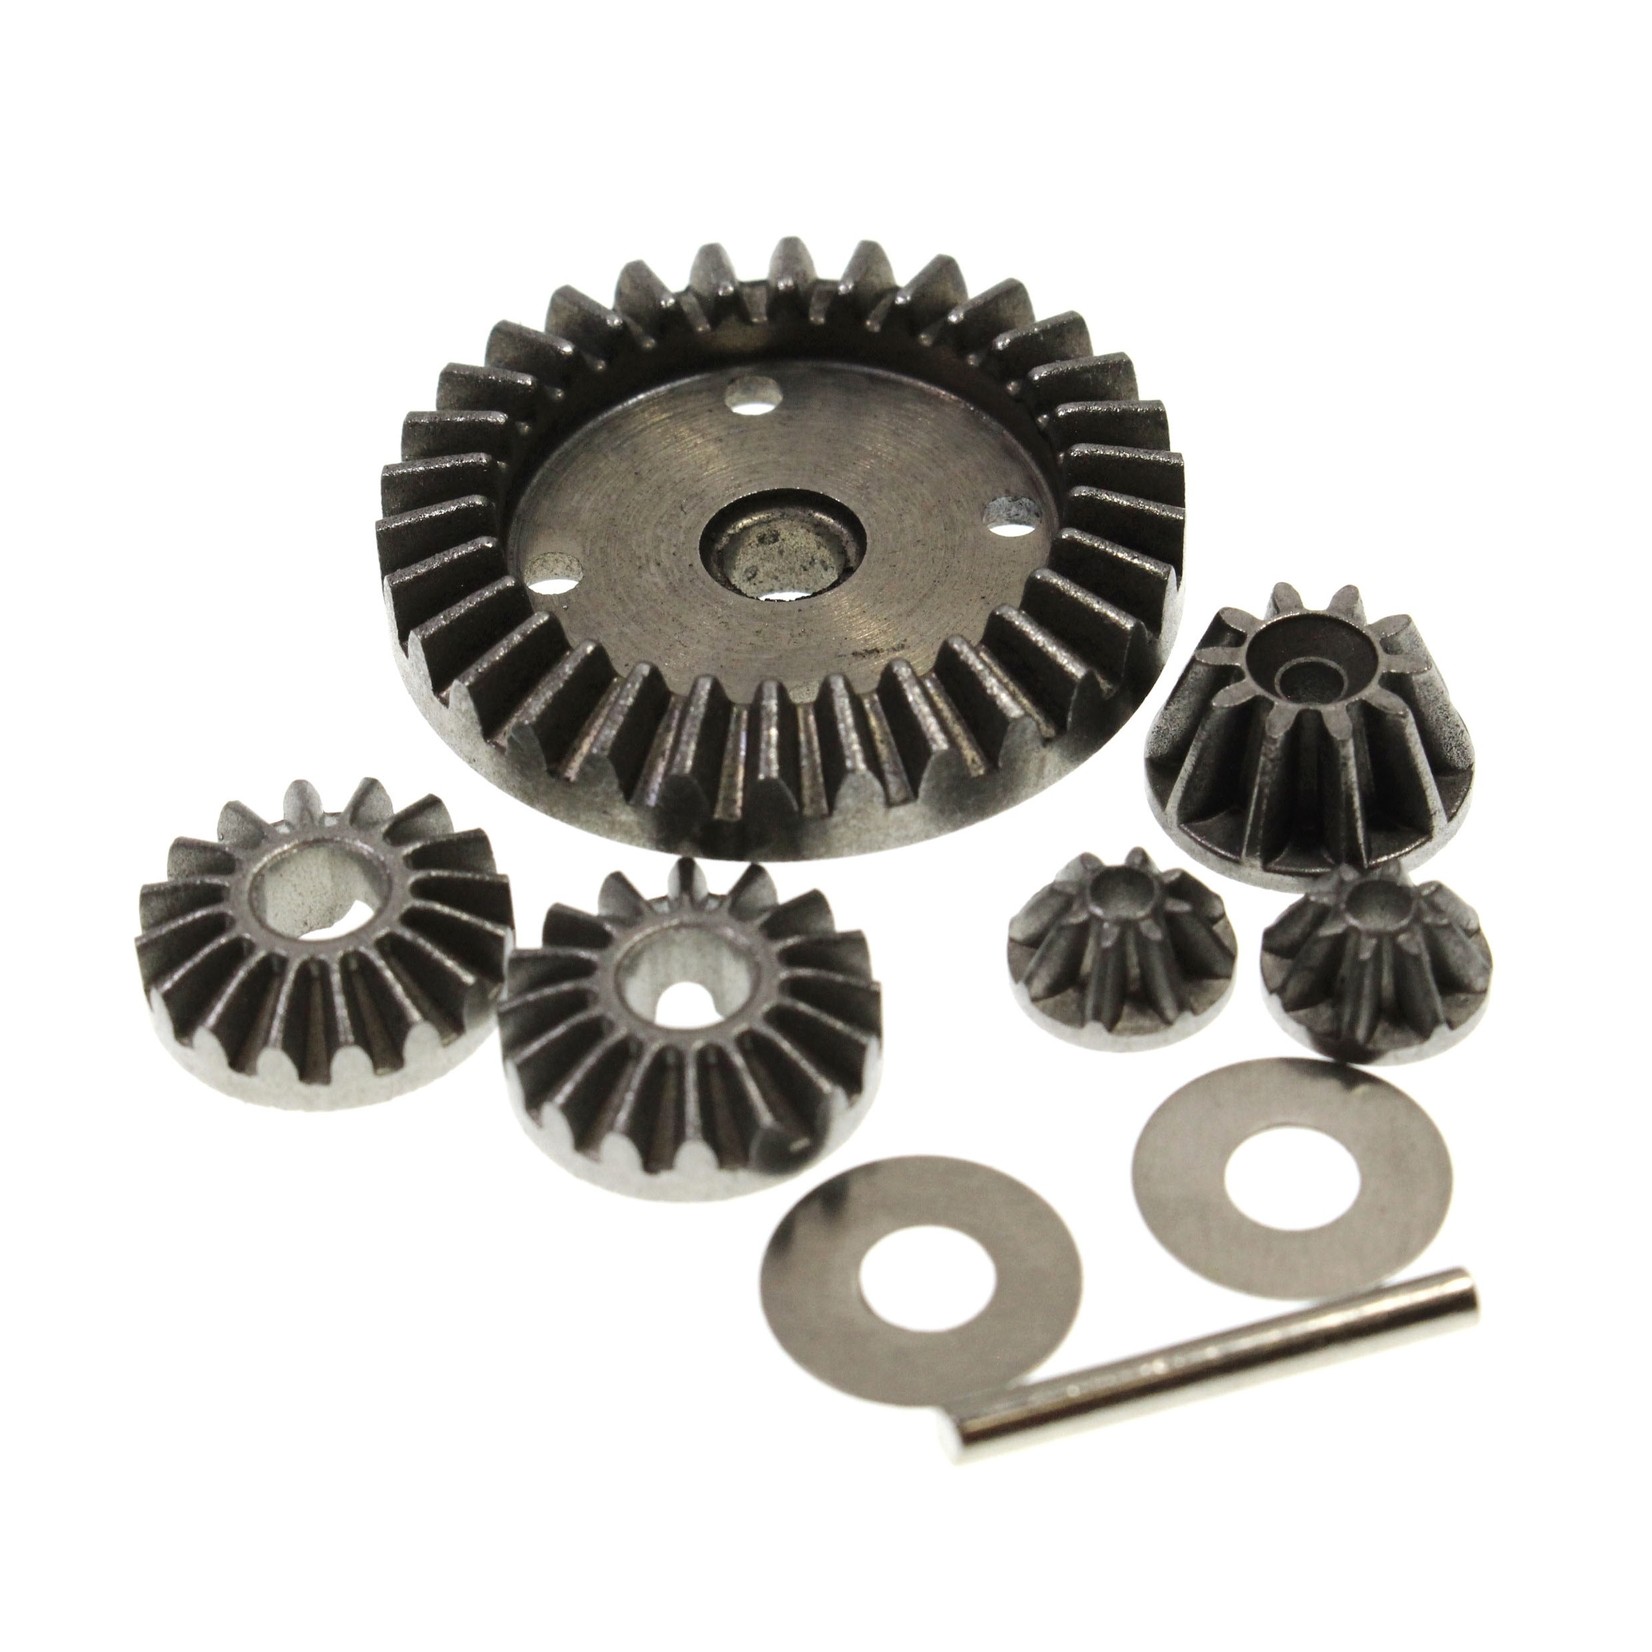 Racers Edge RCE6403  Machined Metal Diff Gears & Diff Pinions & Drive Gear for Blackzon Slyder